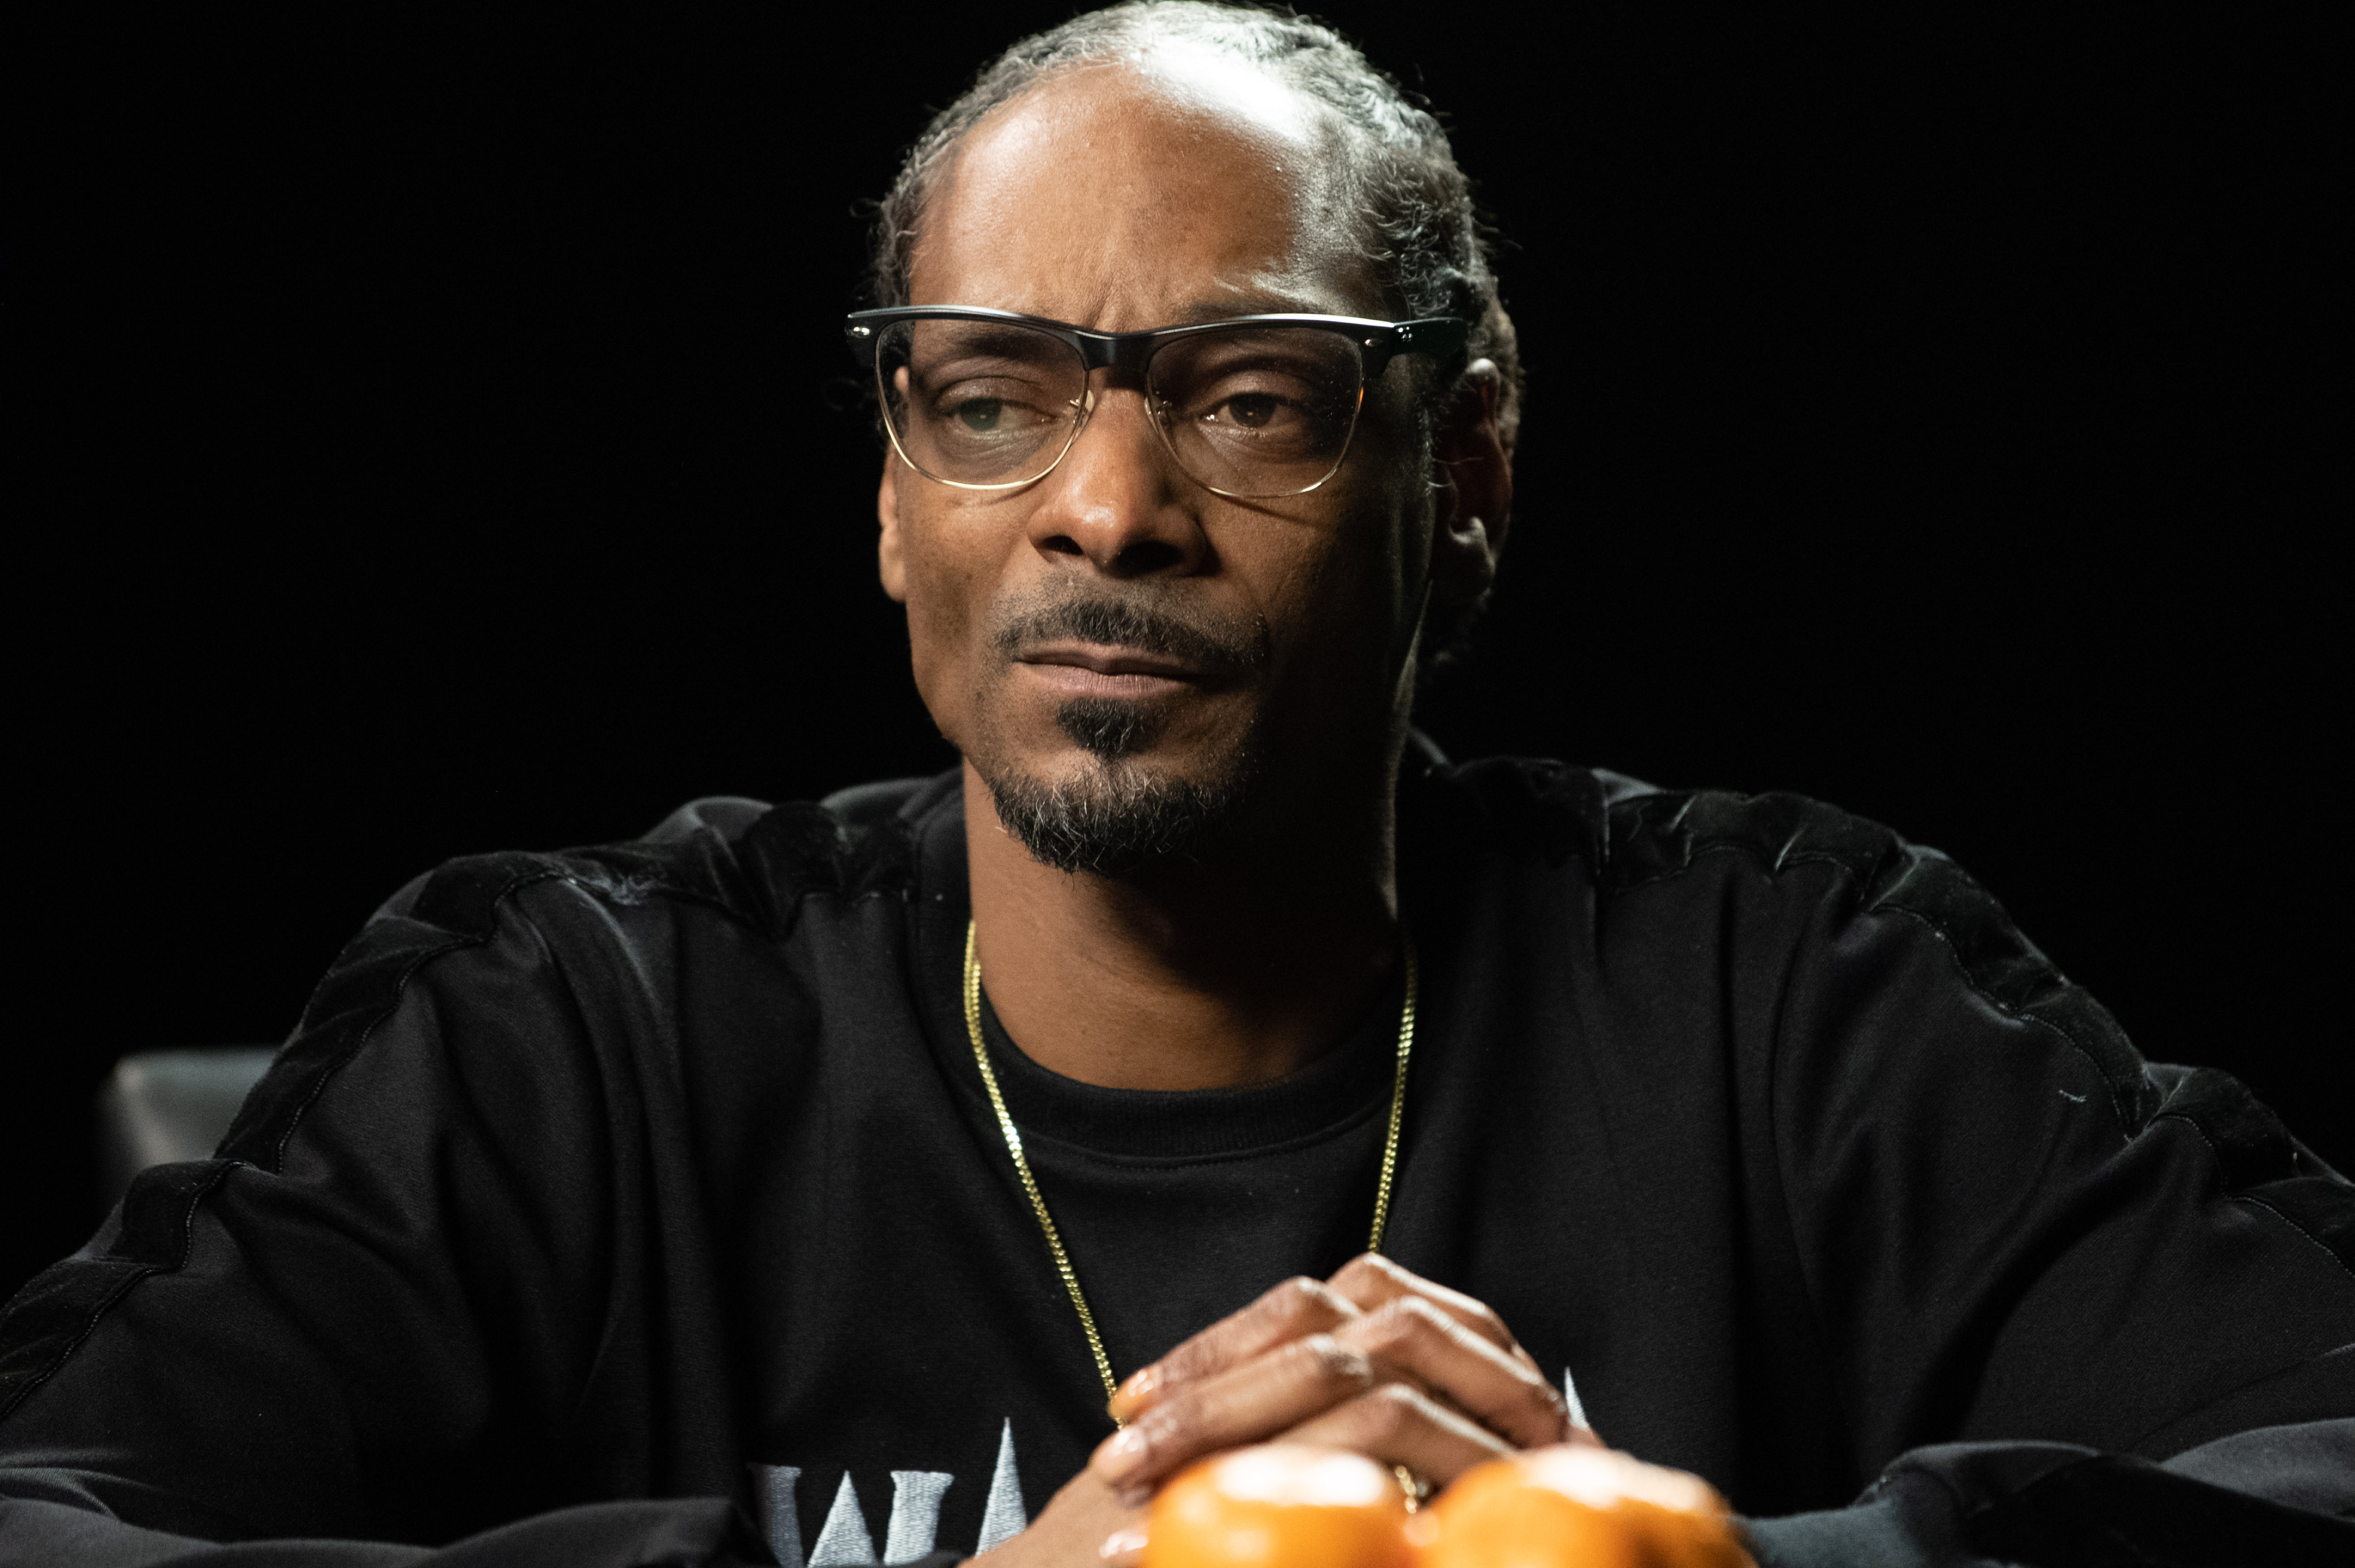 Snoop Dogg speaks in conversation with Kirk Franklin in Los Angeles, California on April 11, 2018 | Source: Getty Images